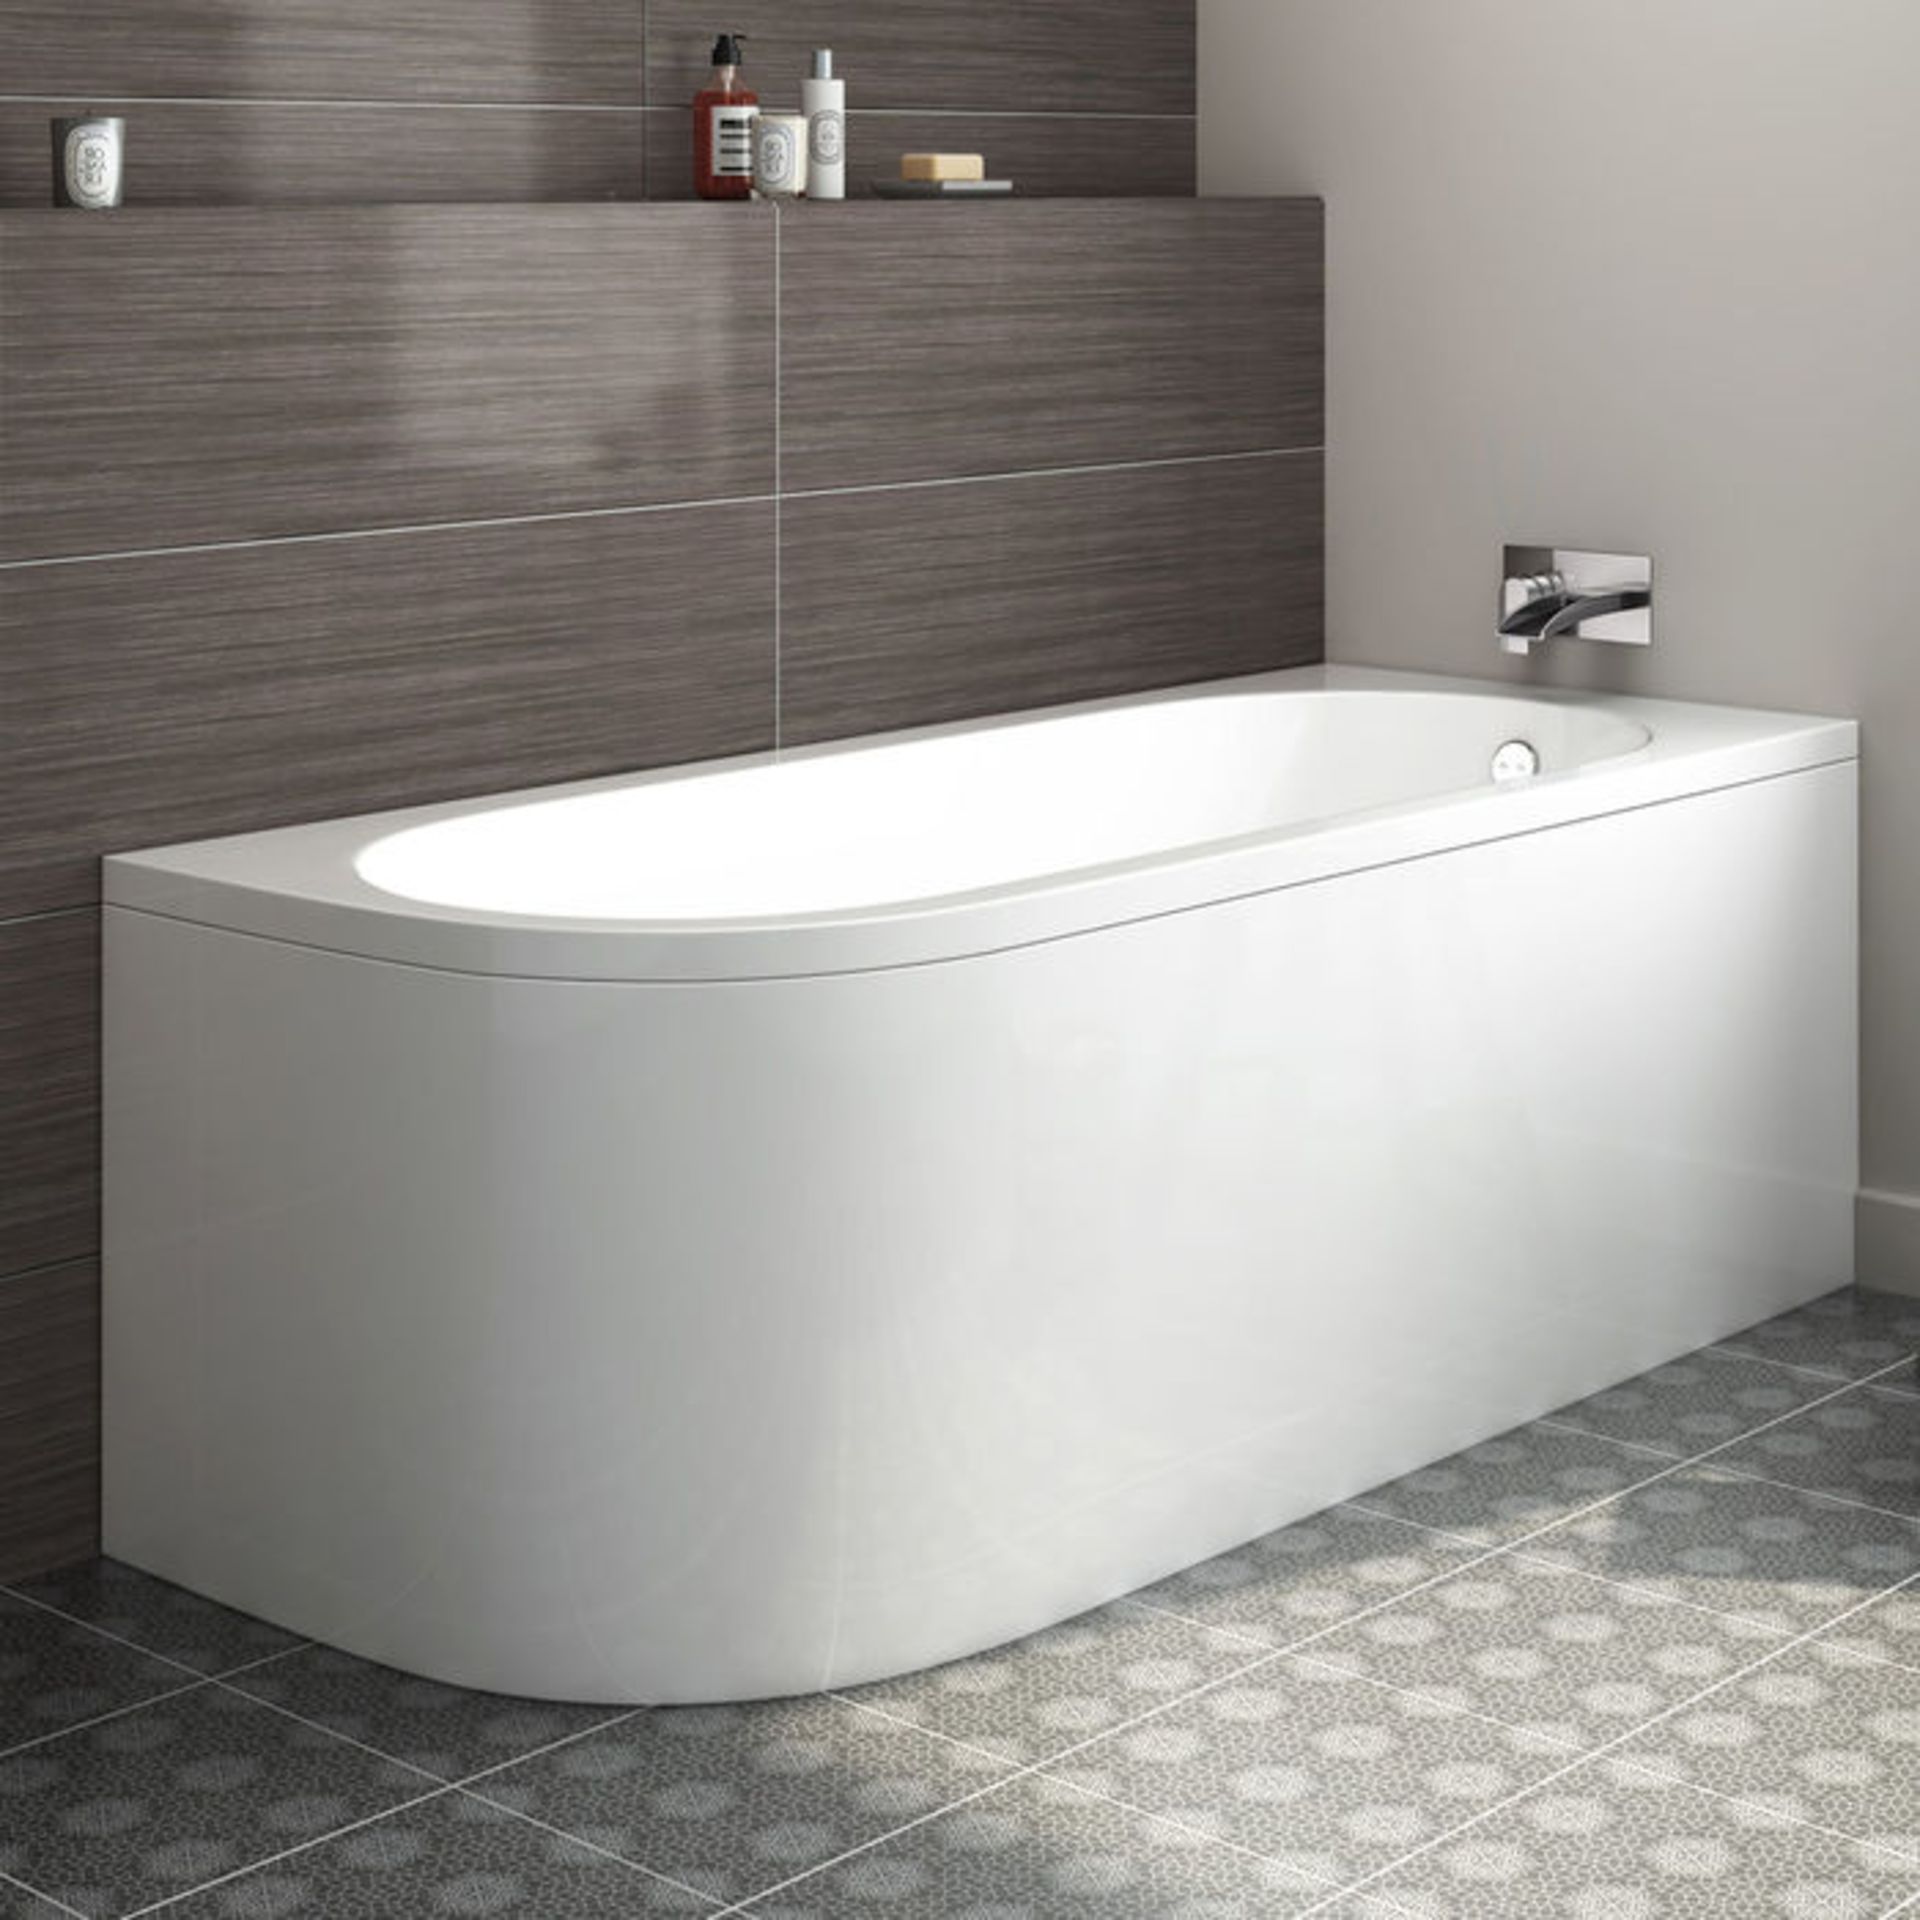 (AL124) 1695x745mm Denver Corner Back to Wall Bath (Includes Panels) - Right Hand. RRP £499.99. - Image 3 of 4